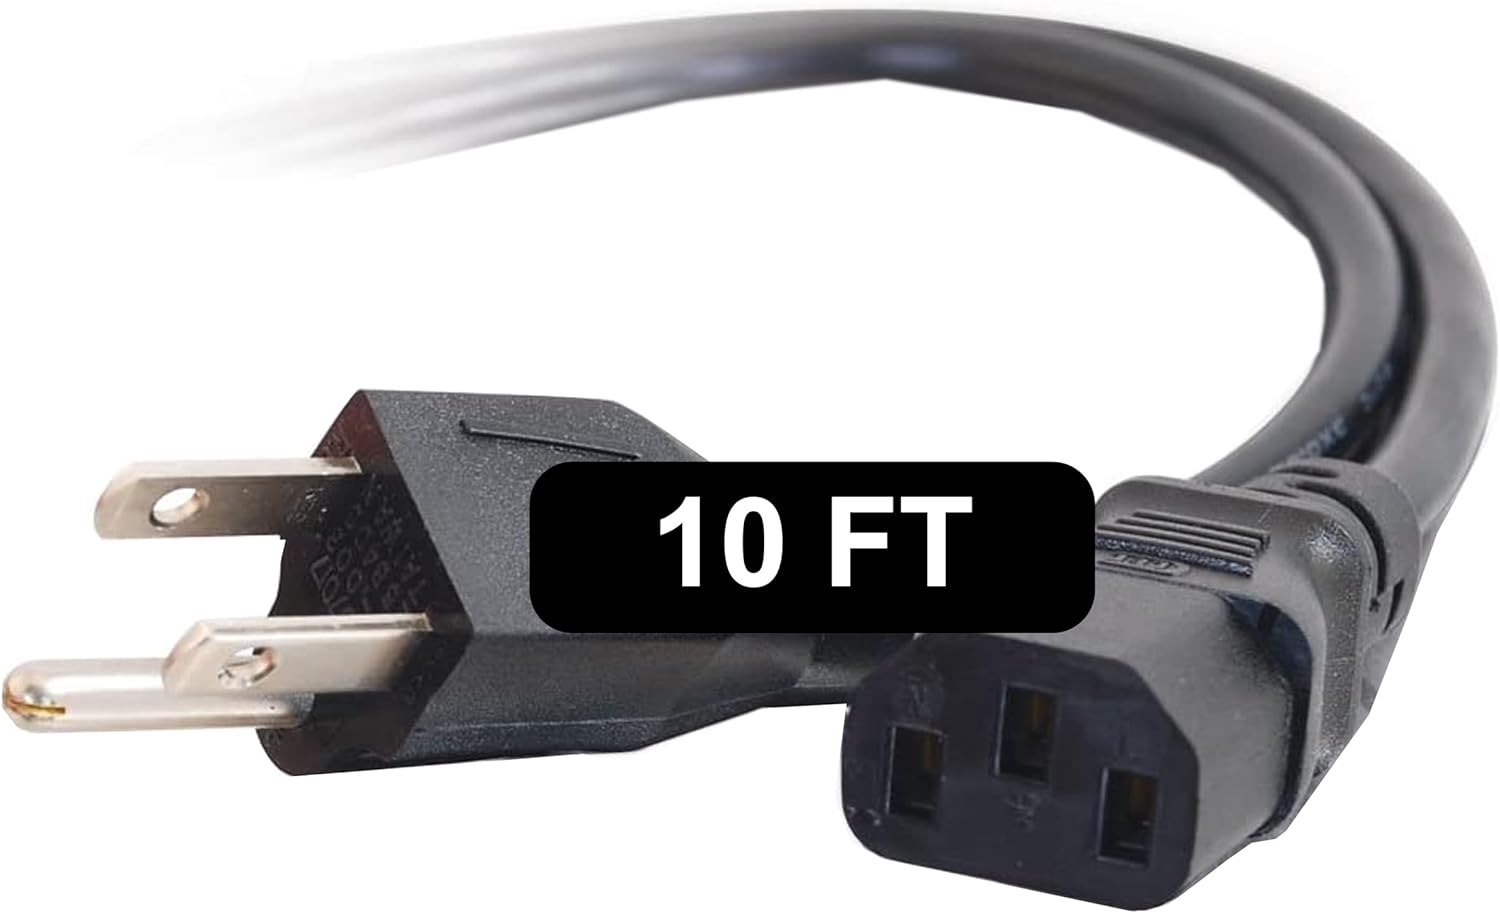 10FT Replacement AC Power Cord - Power Cable for TV, Computer, Monitor, Applianc